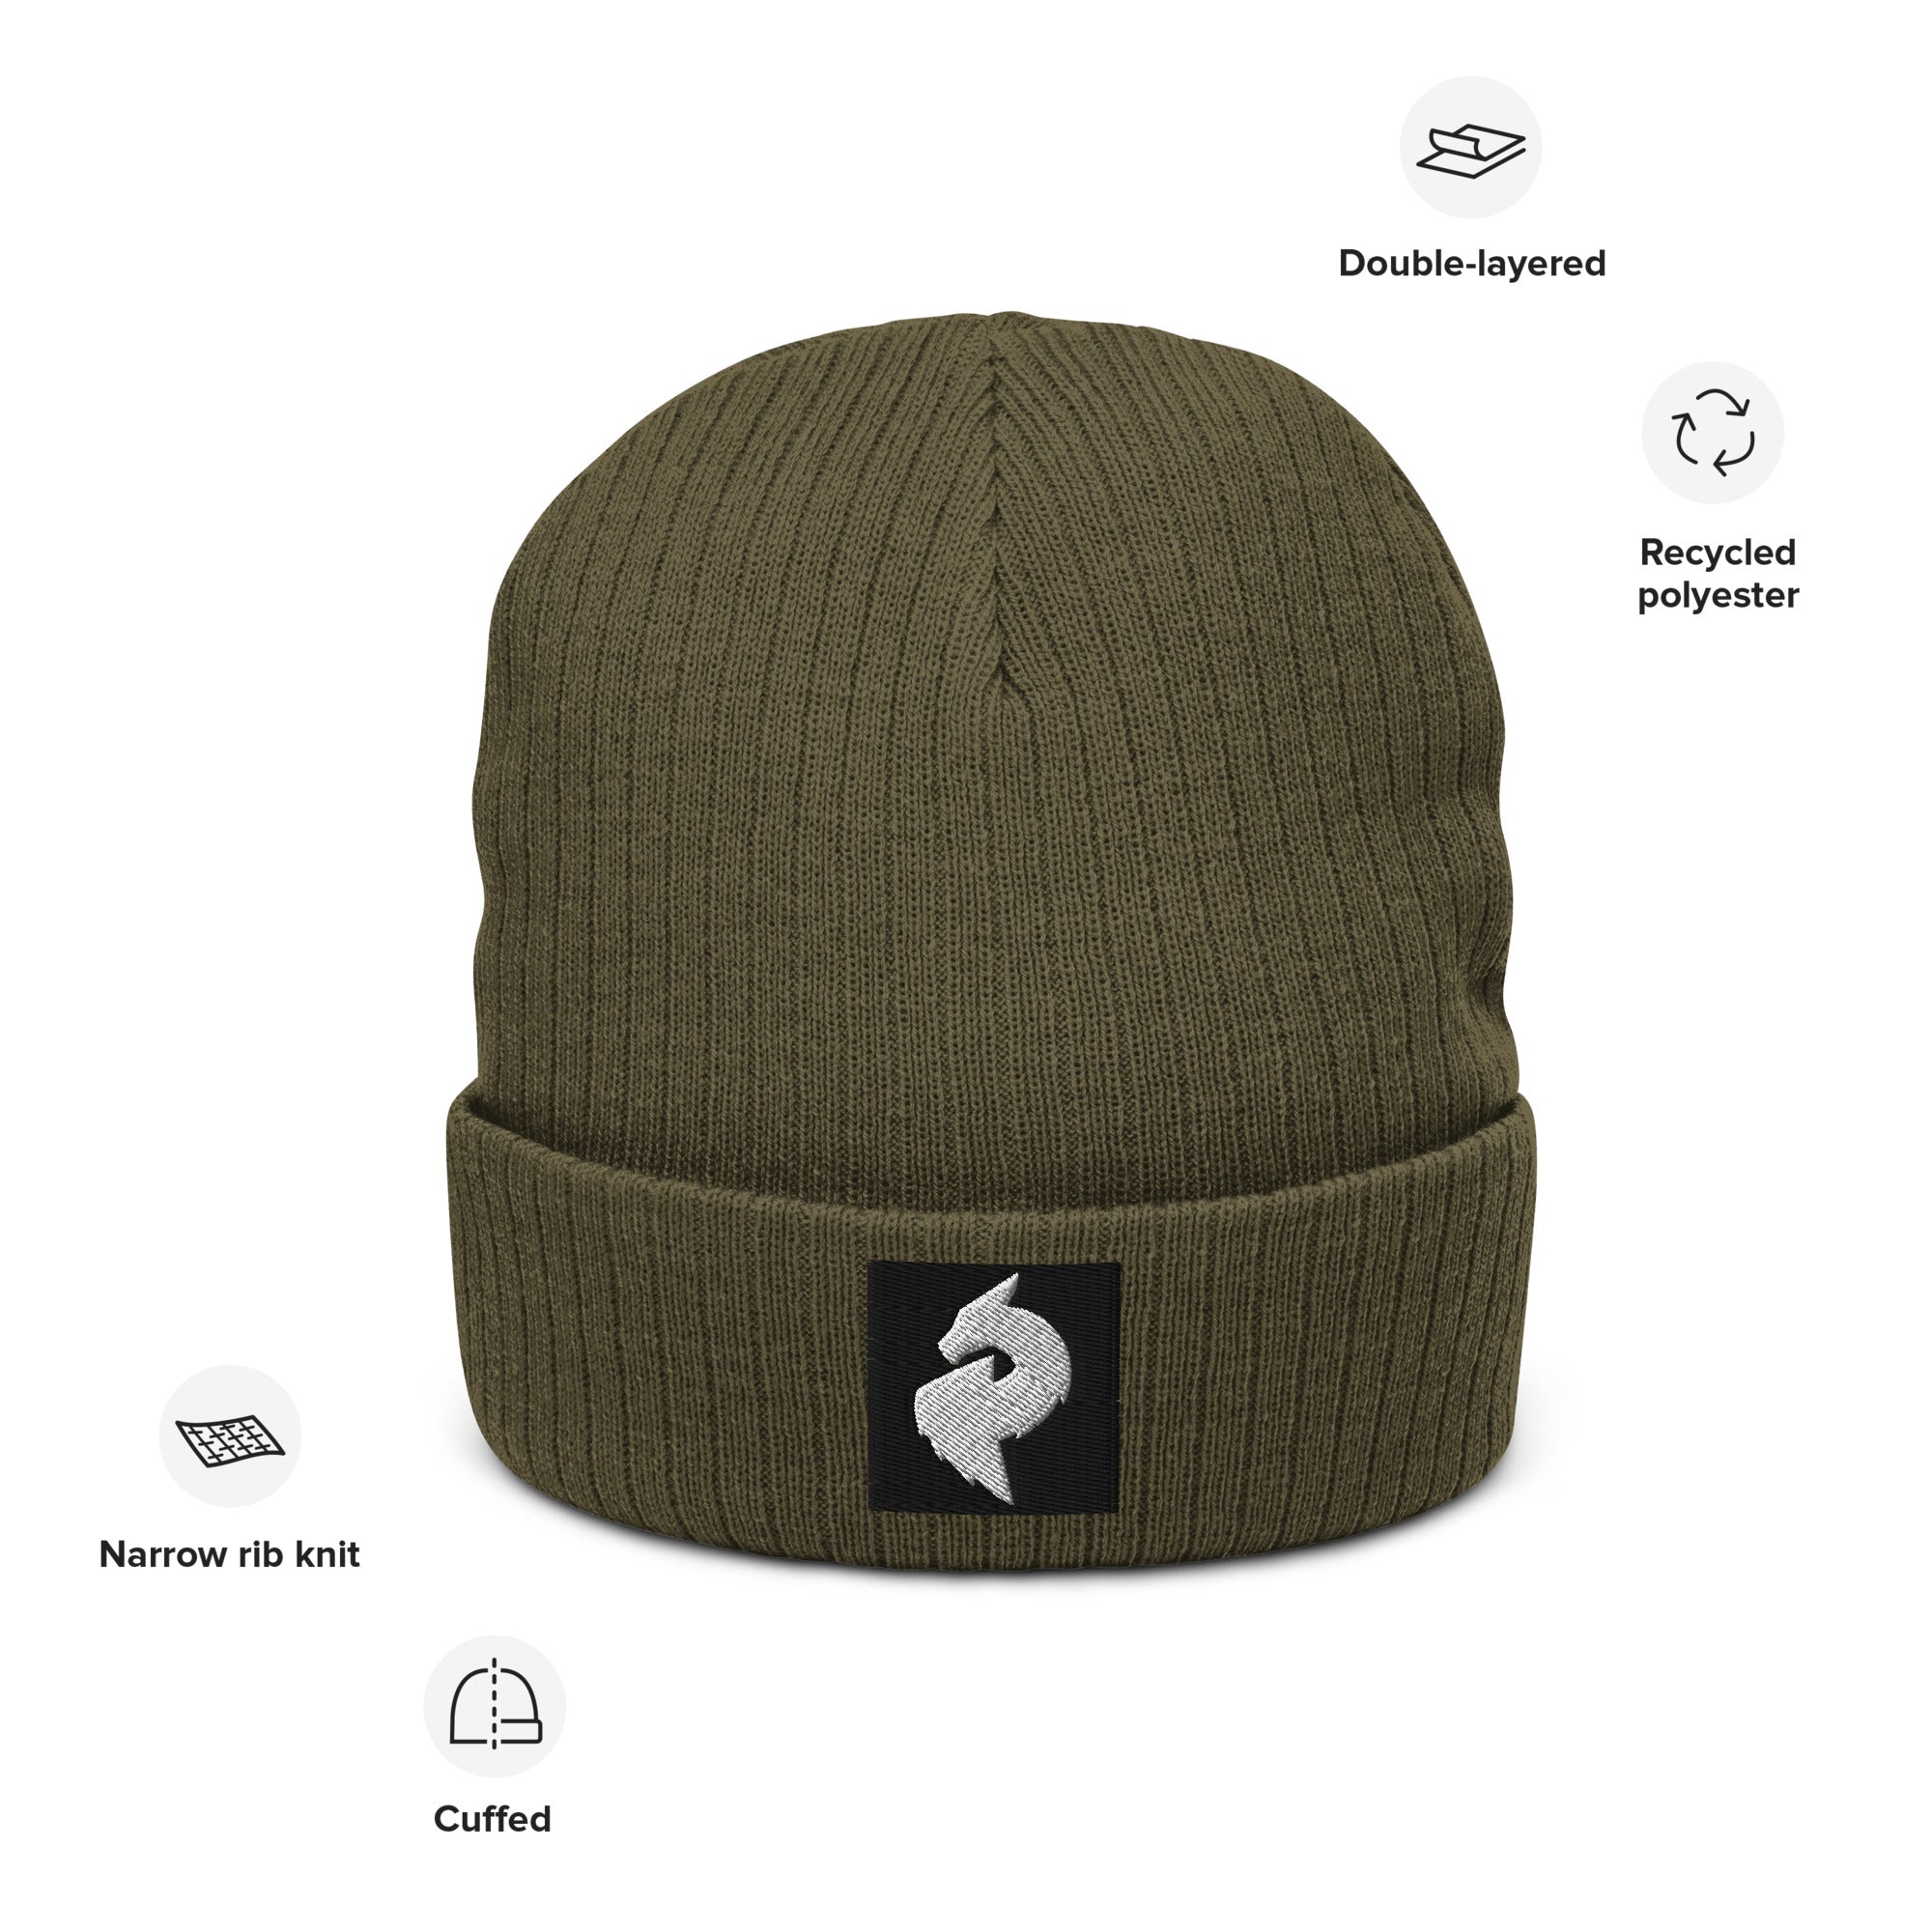 His or Hers Dragon Foxx™ Eco - Ribbed knit beanie - His or Hers Dragon Foxx™ Eco - Ribbed knit beanie - DRAGON FOXX™ - His or Hers Dragon Foxx™ Eco - Ribbed knit beanie - 2867494_13242 - Olive - - Accessories - Acid Green Eco - Ribbed knit beanie - Beanie